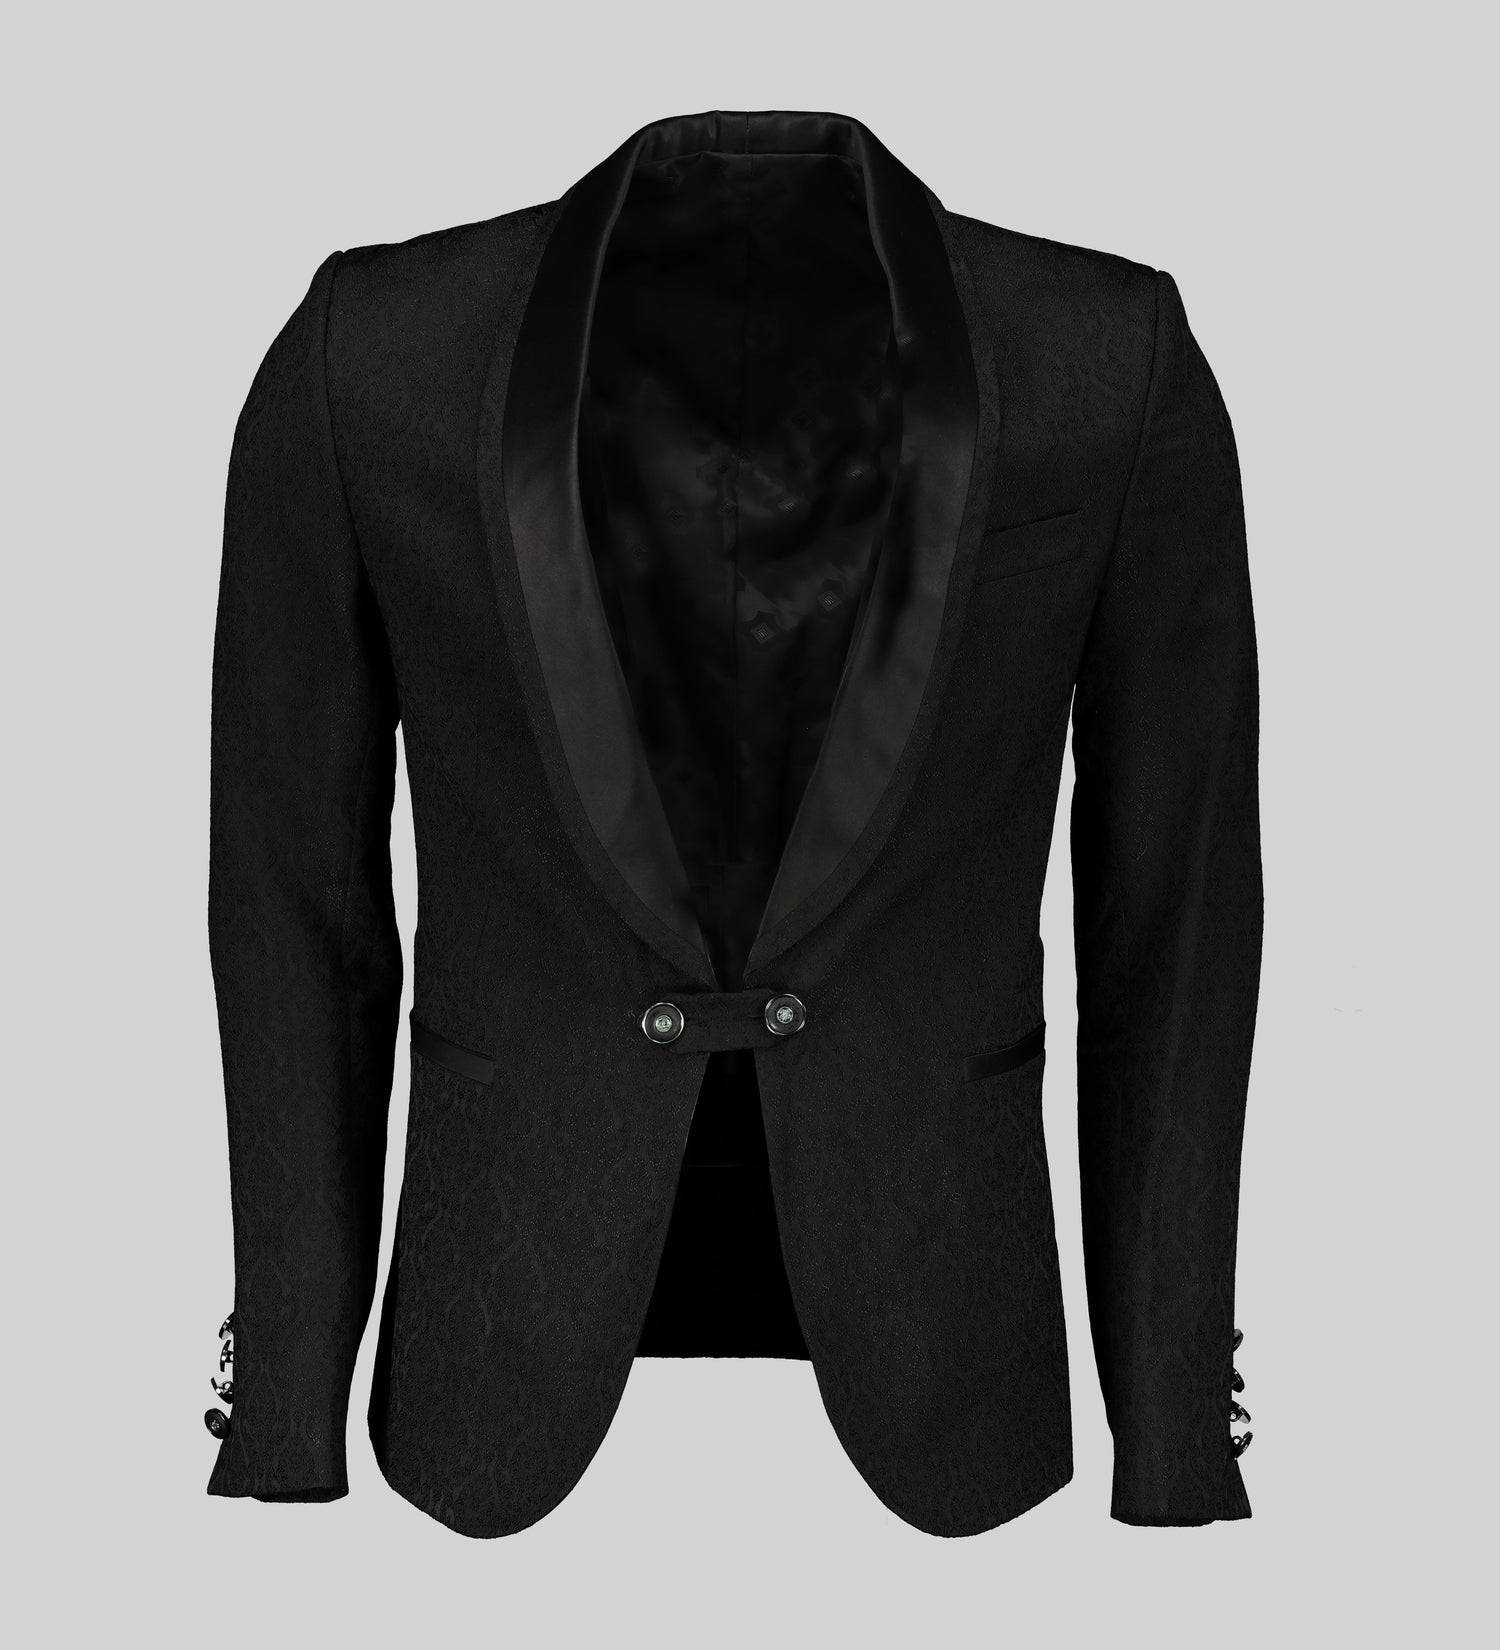 AFI Privé Atelier Black Brocade Suit Blazer with two side by side buttons